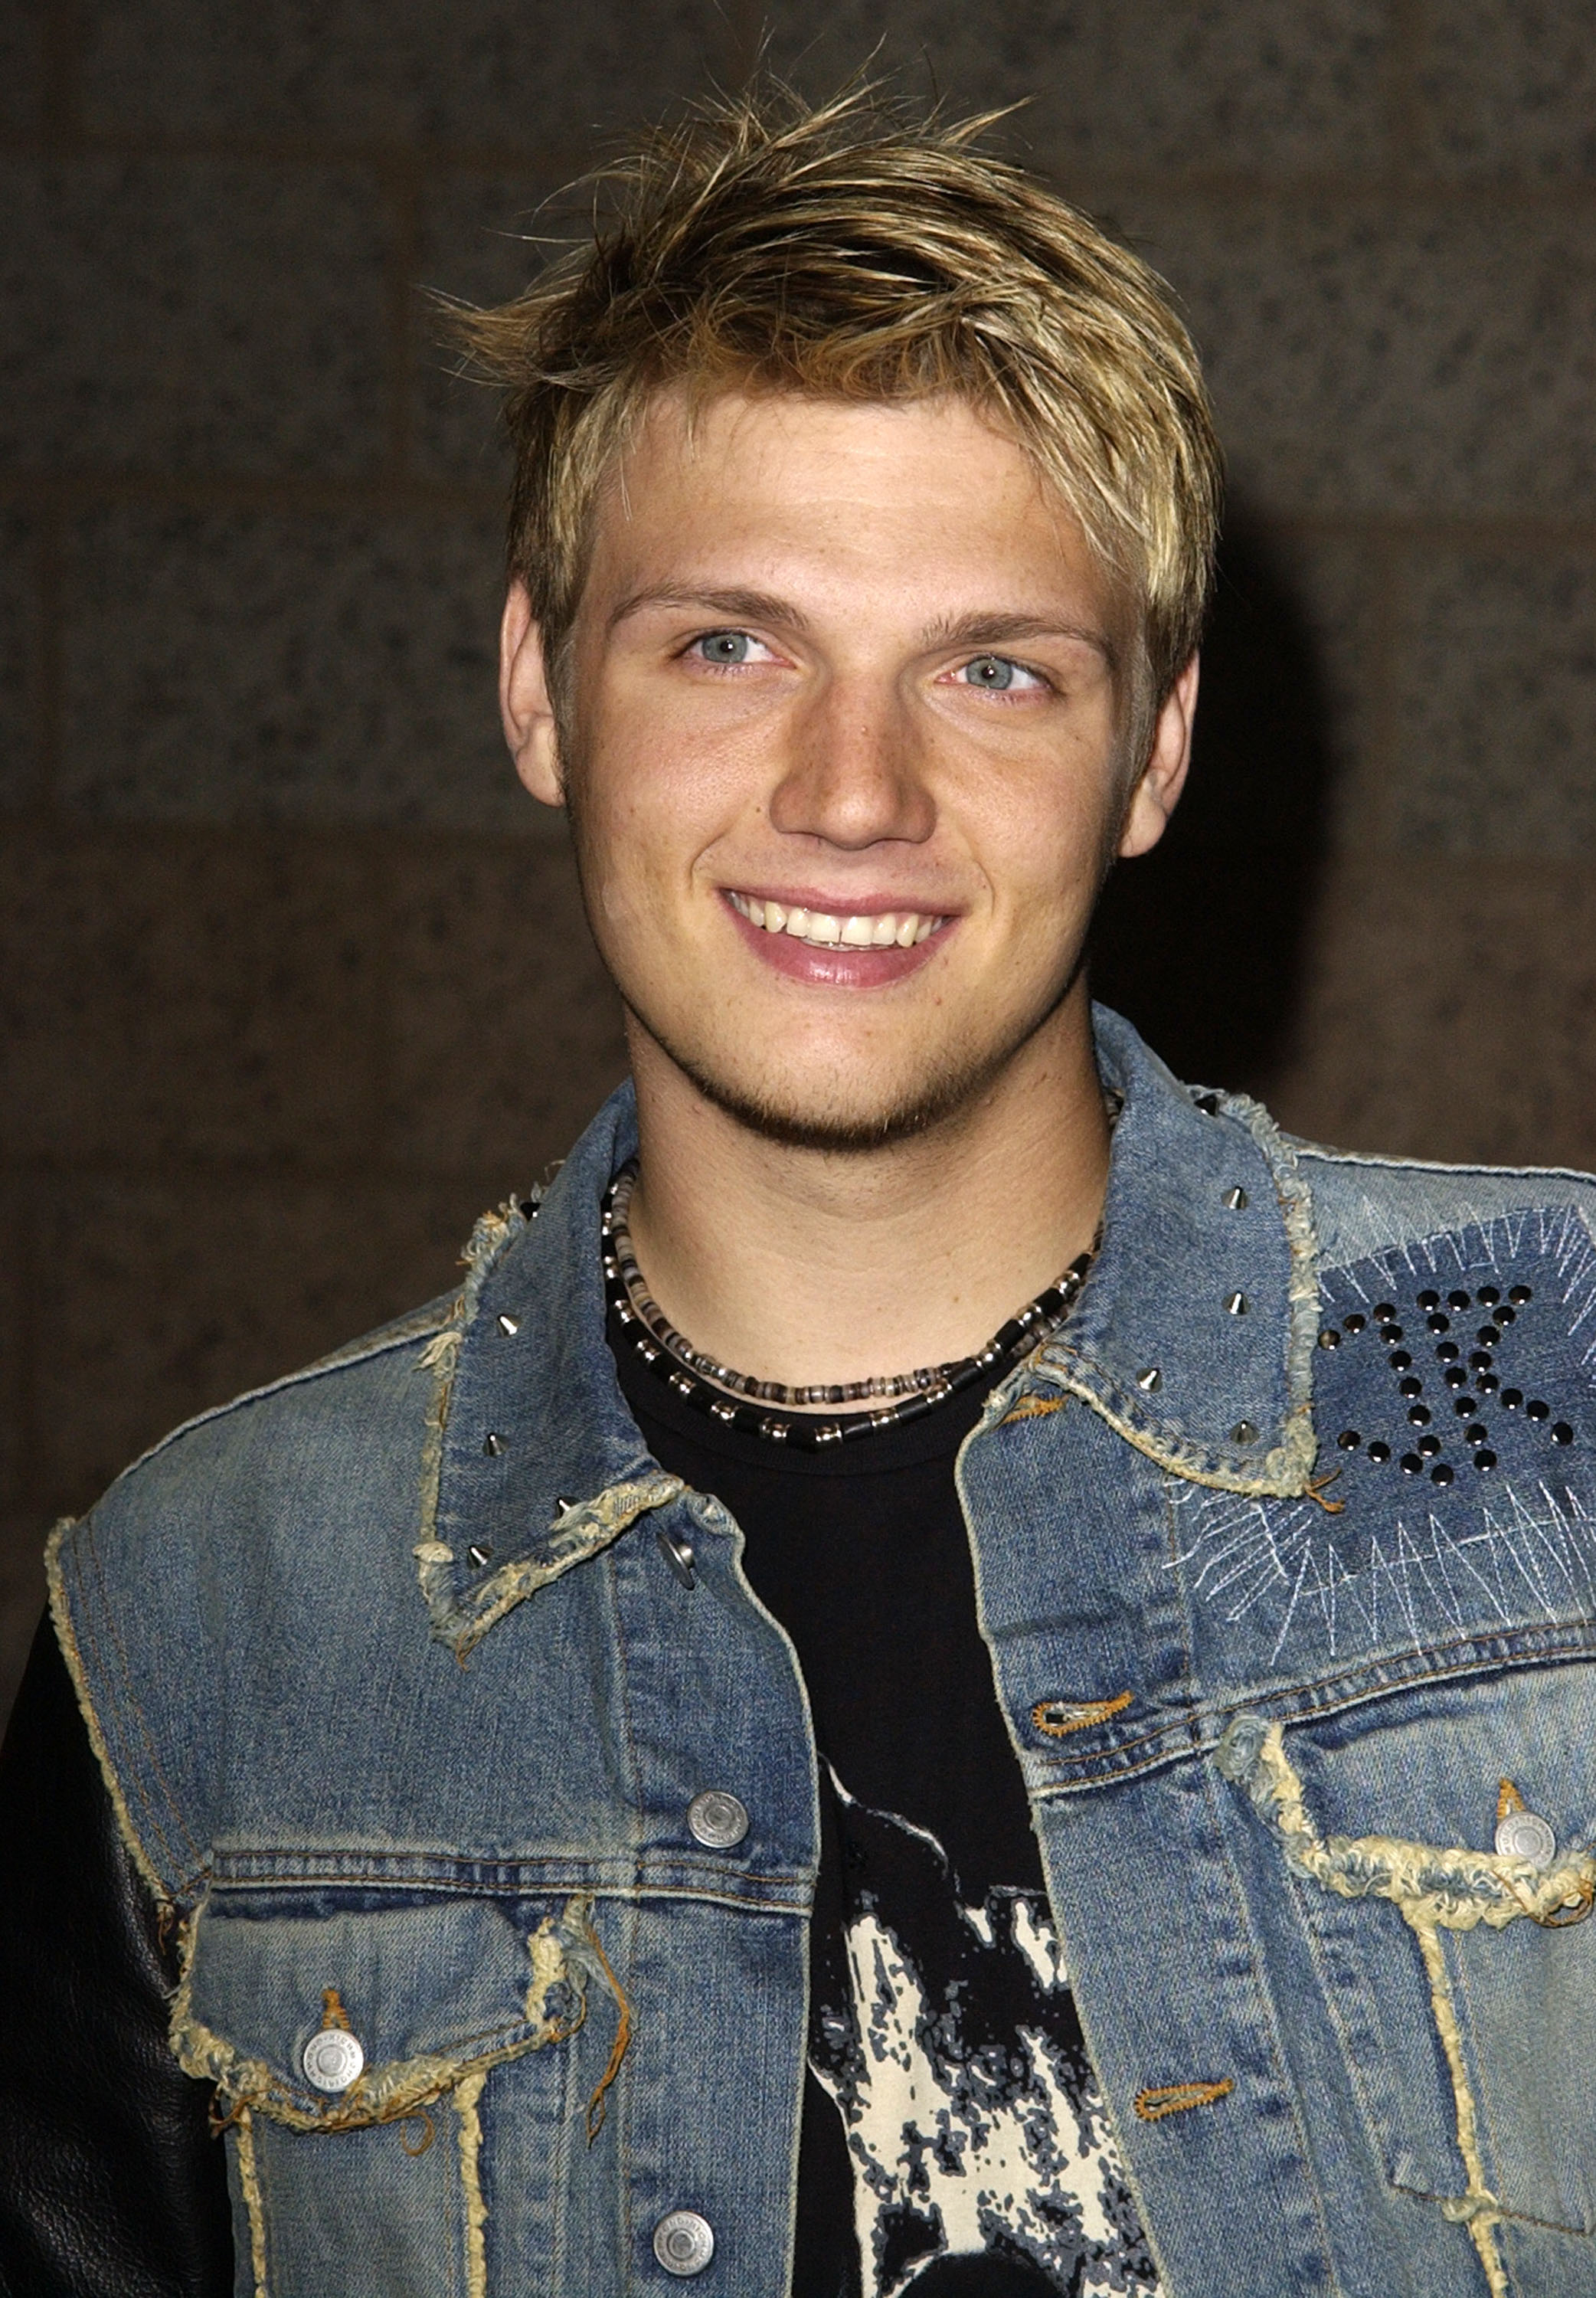 Nick Carter during the Billboard Music Awards - arrivals at MGM Grand Arena in Las Vegas, Nevada on December 9, 2002. | Source: Getty Images